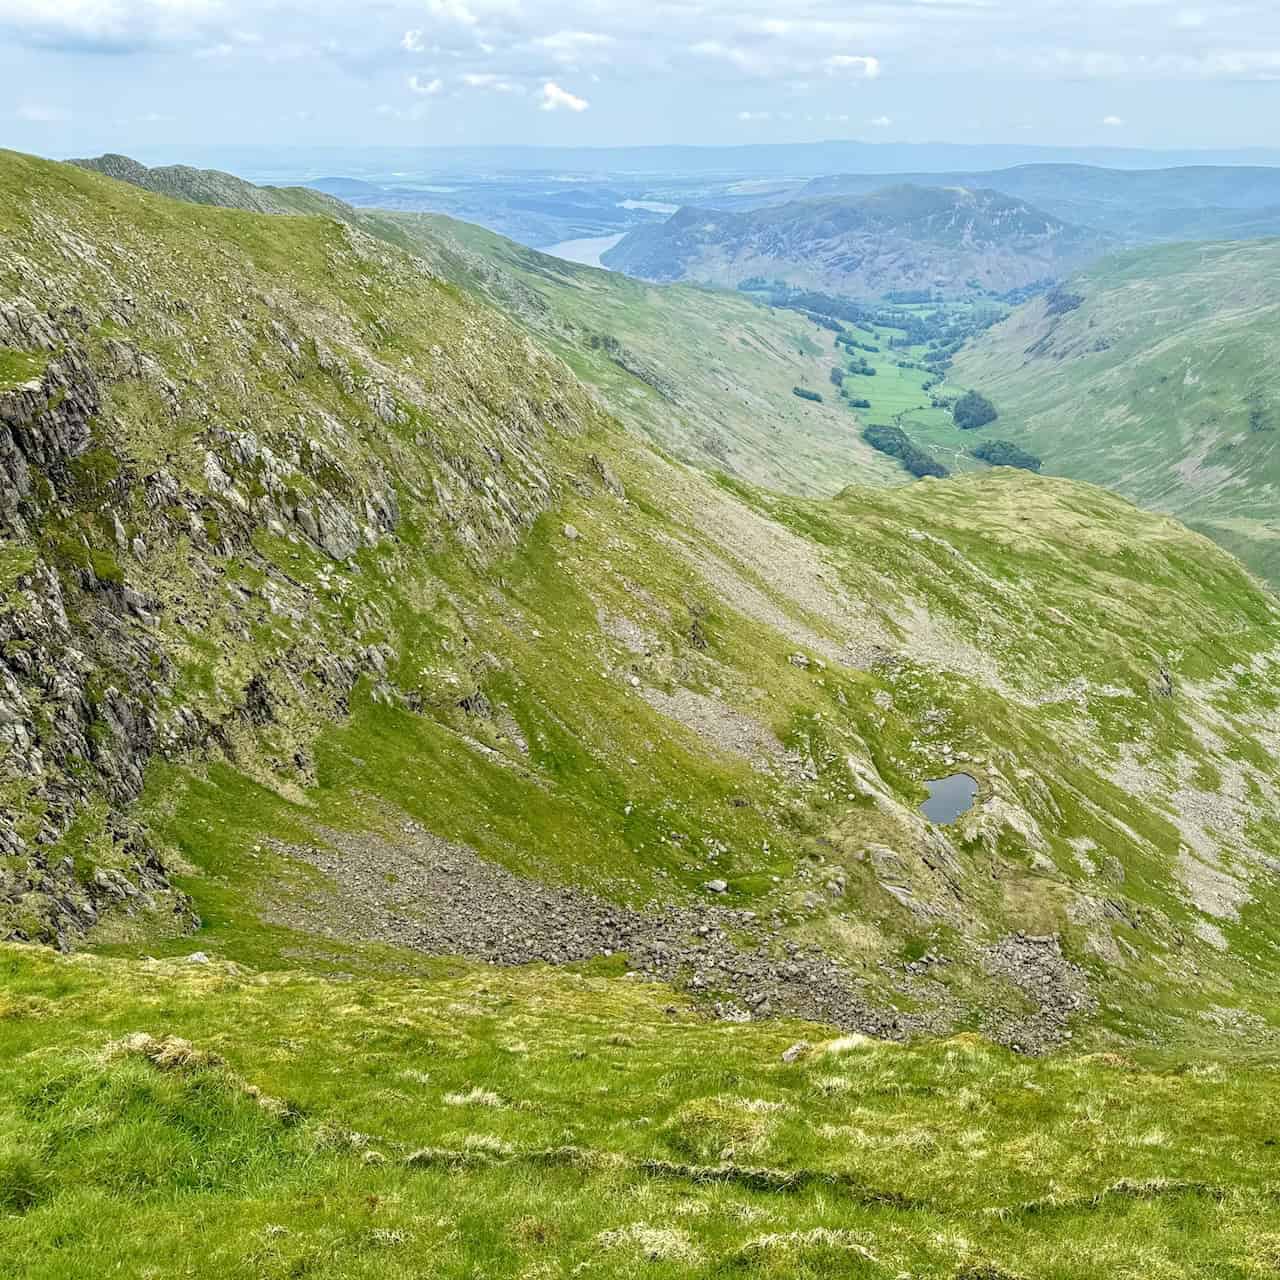 From High Crag, we observe the rocky slopes of Nethermost Crag on the left, with Hard Tarn below. Place Fell and Ullswater are visible in the distance.